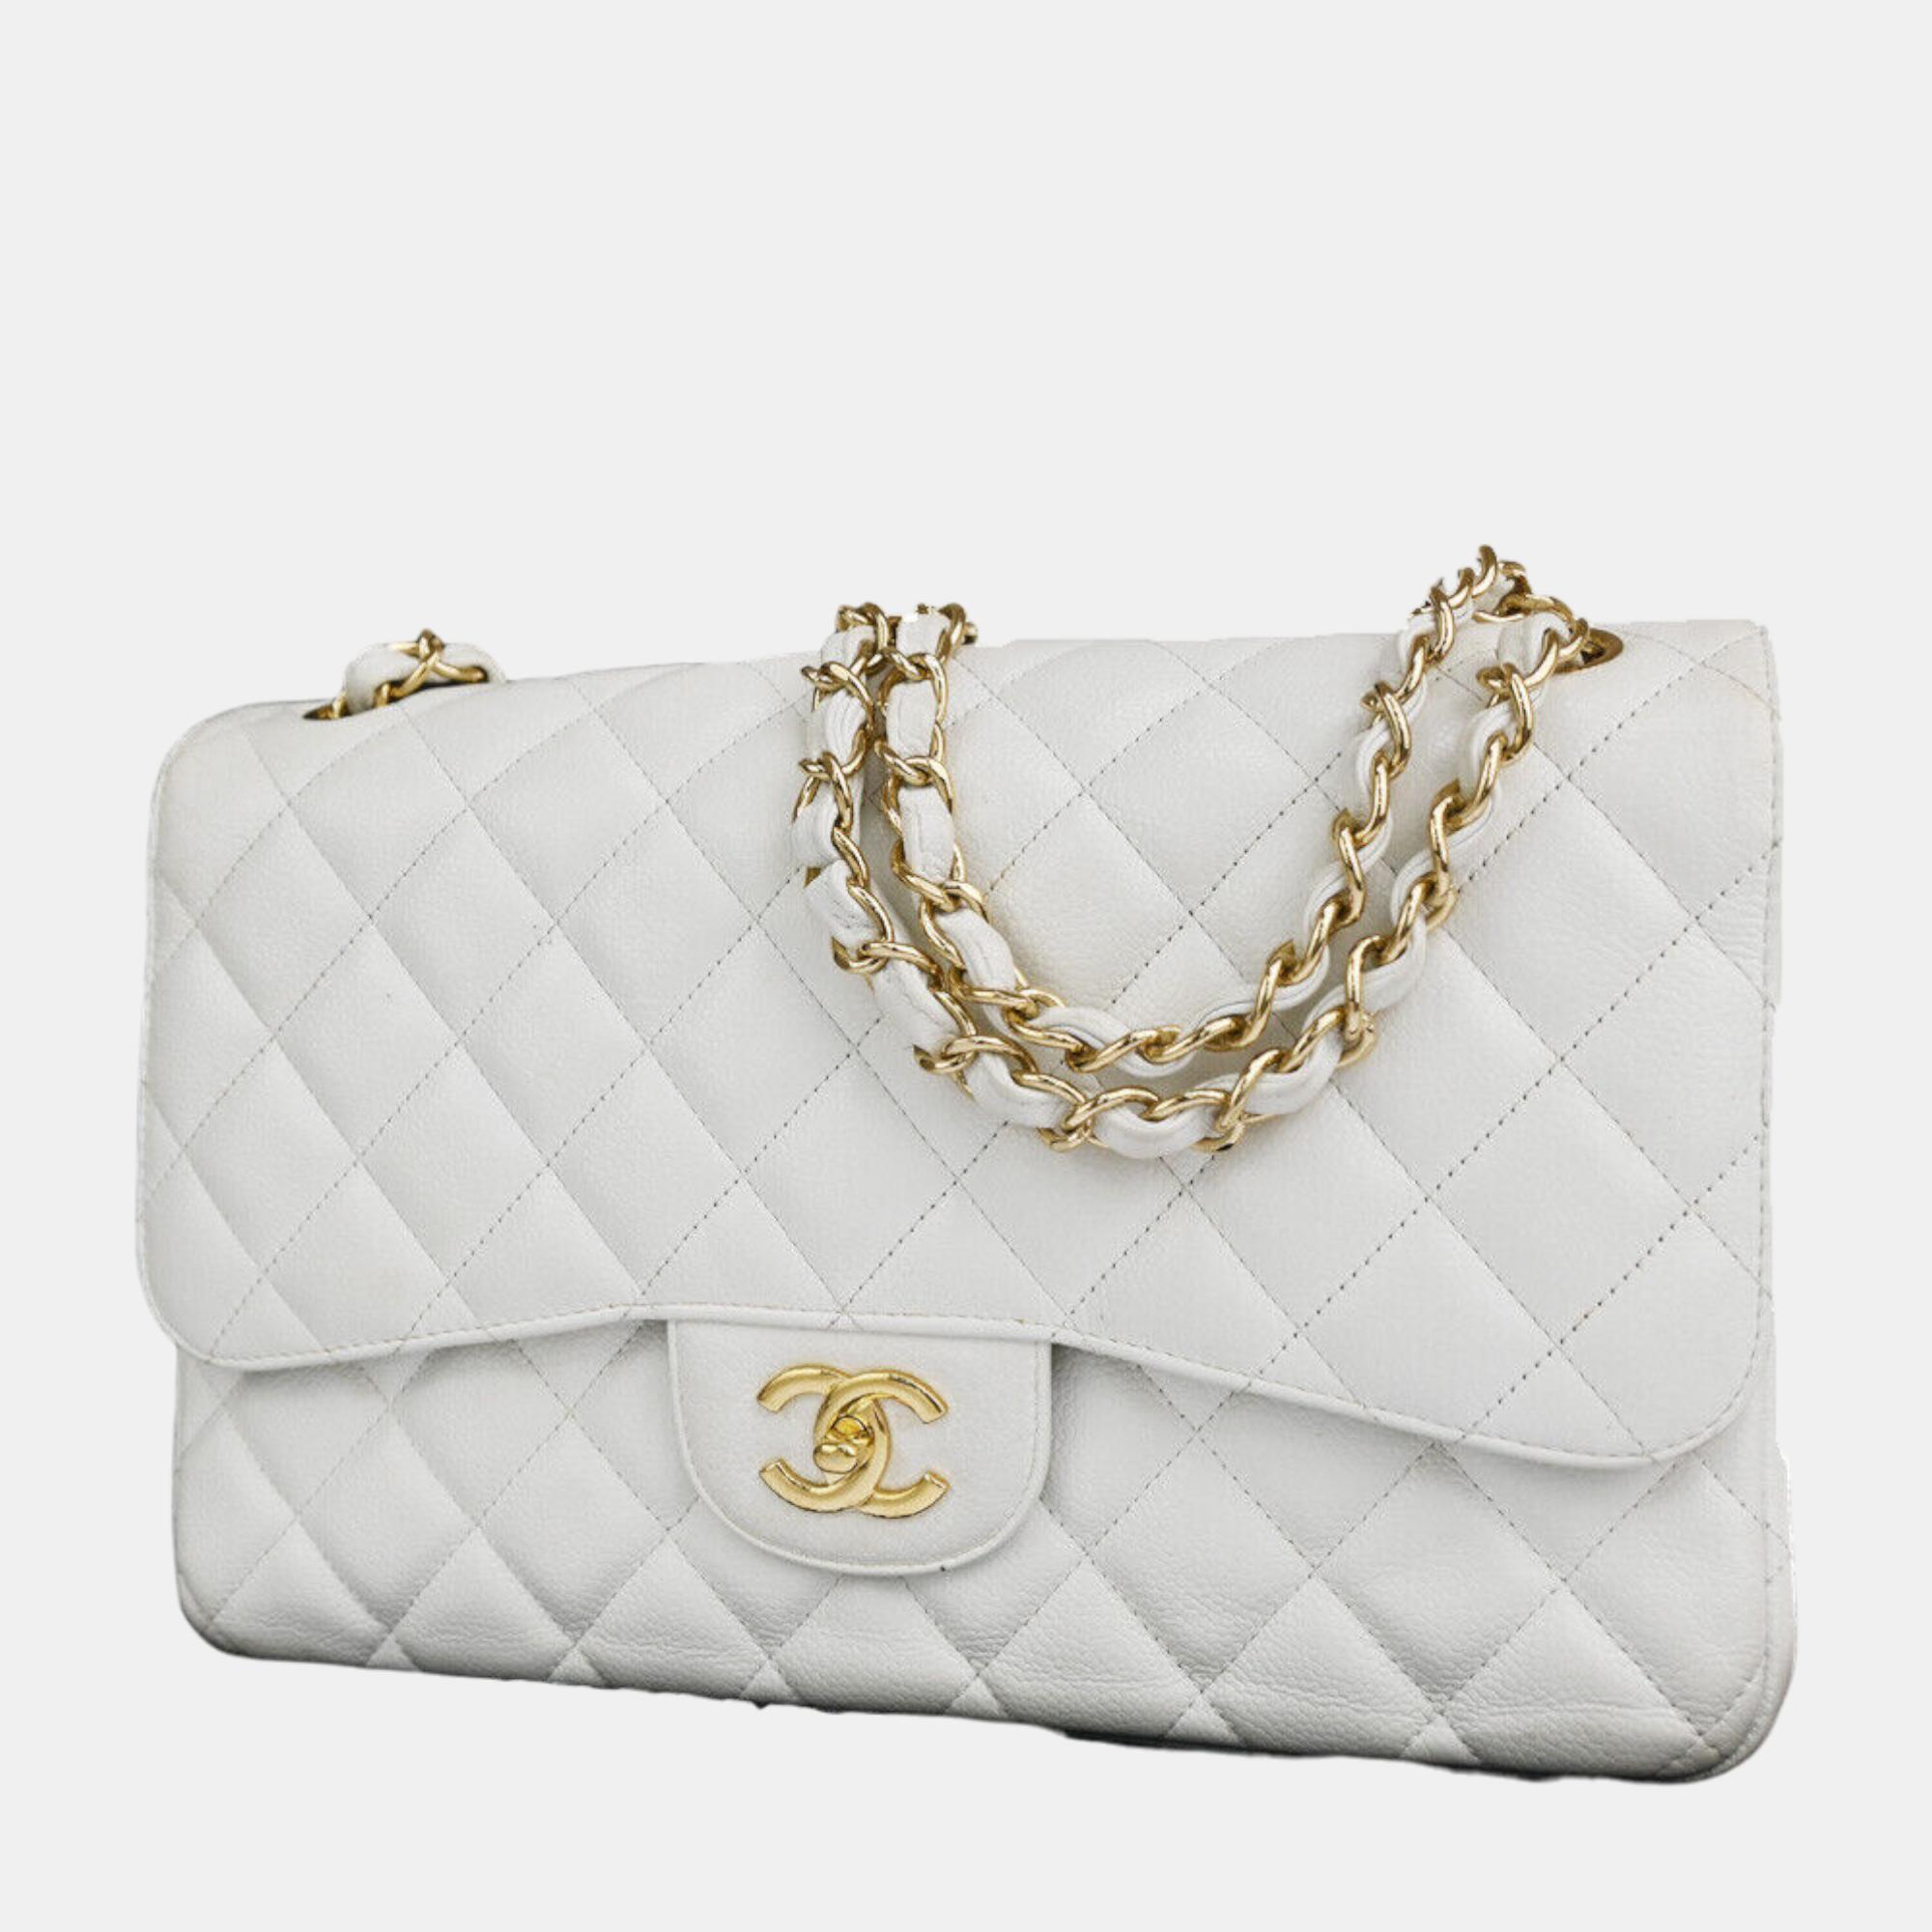 Chanel white lambskin leather  classic double flap shoulder bags